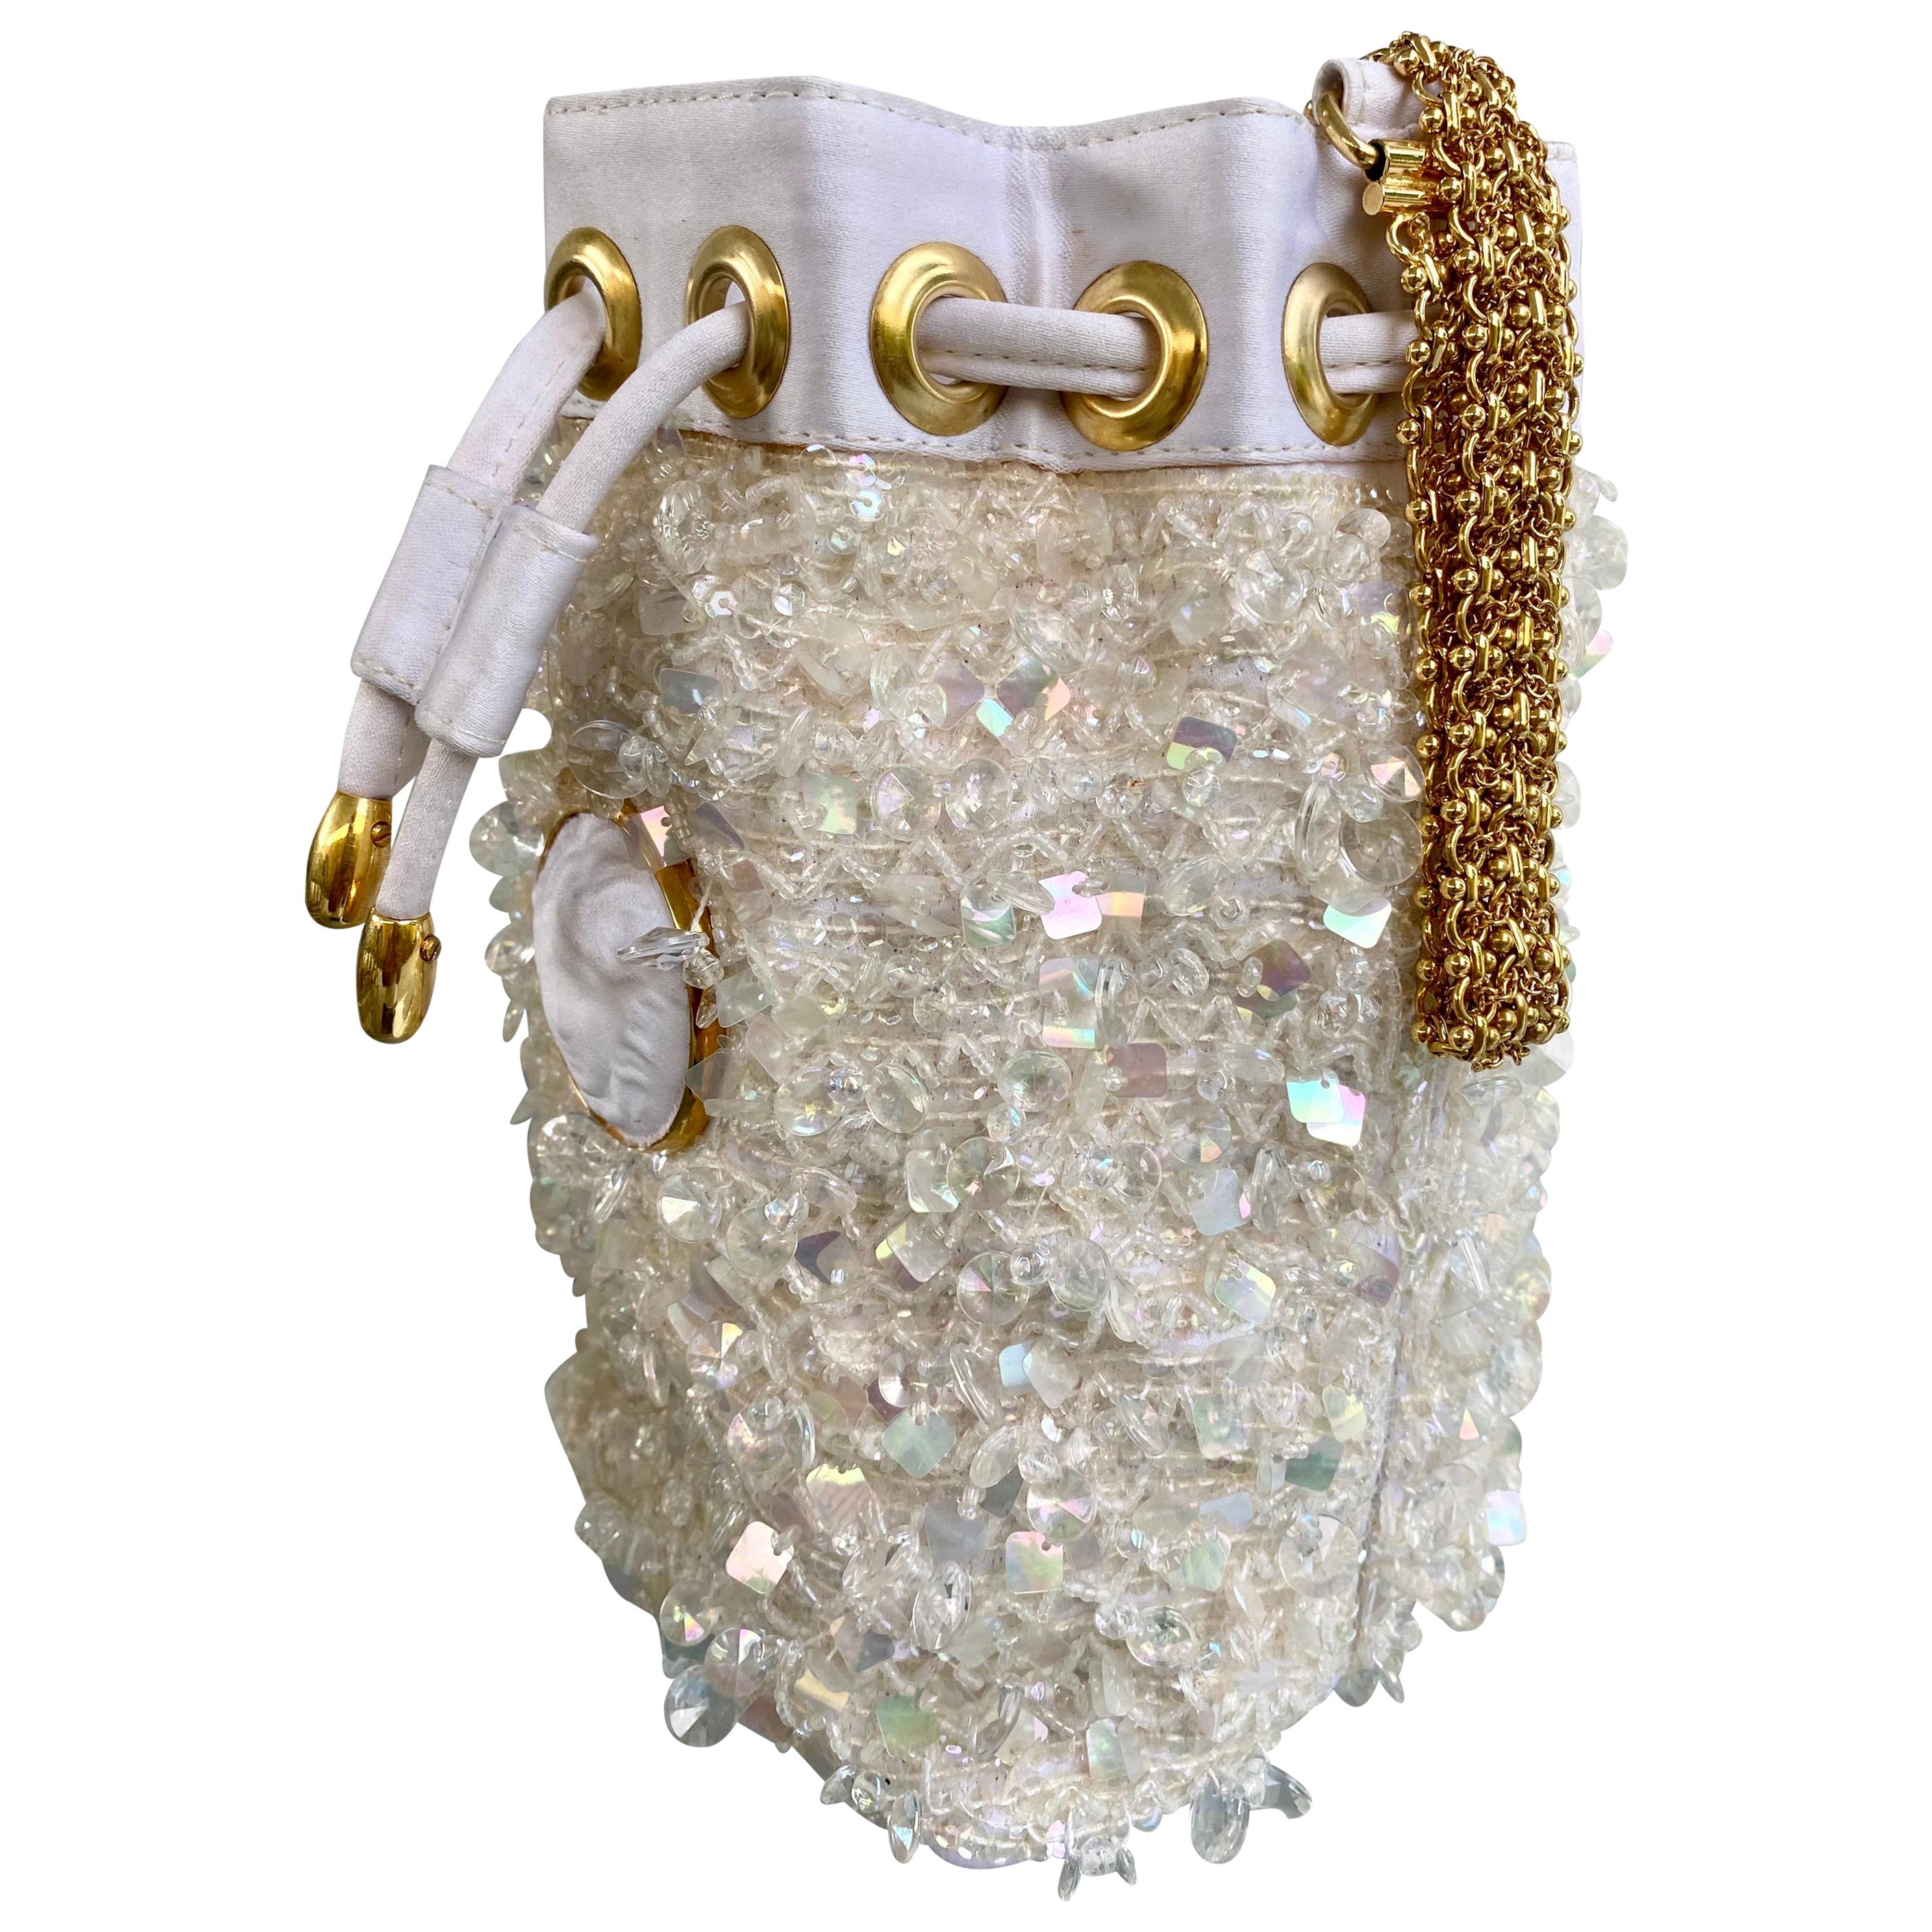 Gianni Versace Rare Vintage Sequined and Beaded Drawstring Mini Bucket Bag